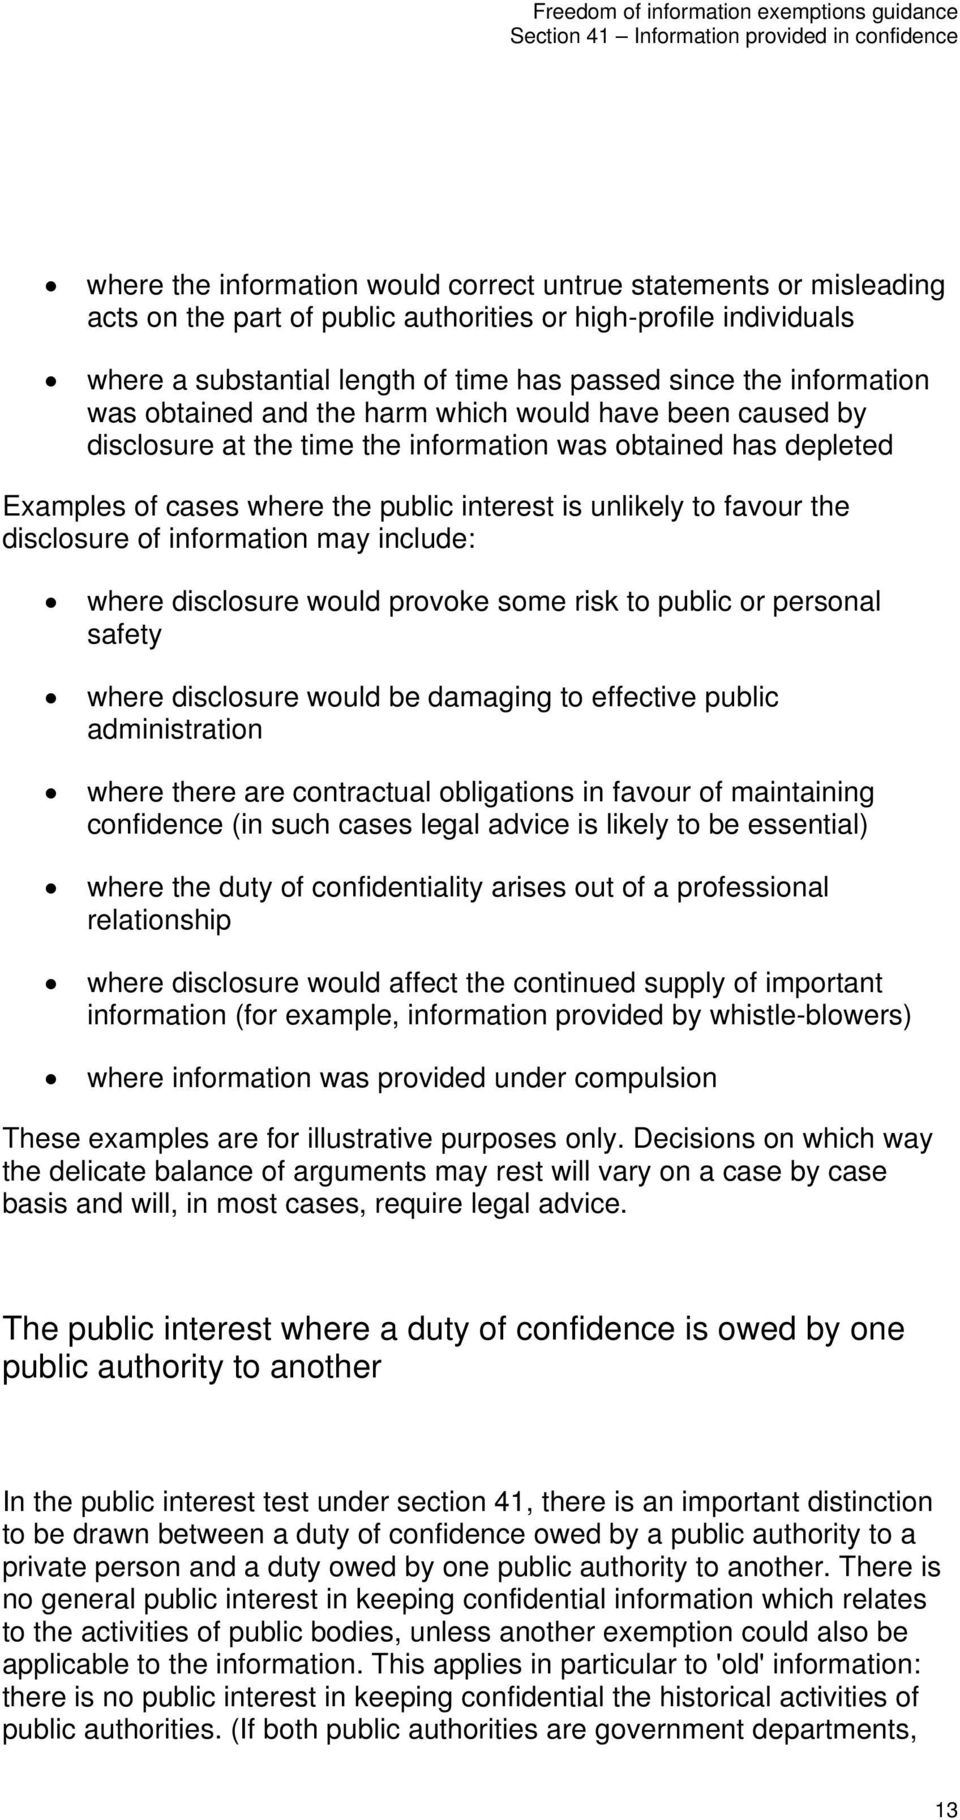 favour the disclosure of information may include: where disclosure would provoke some risk to public or personal safety where disclosure would be damaging to effective public administration where